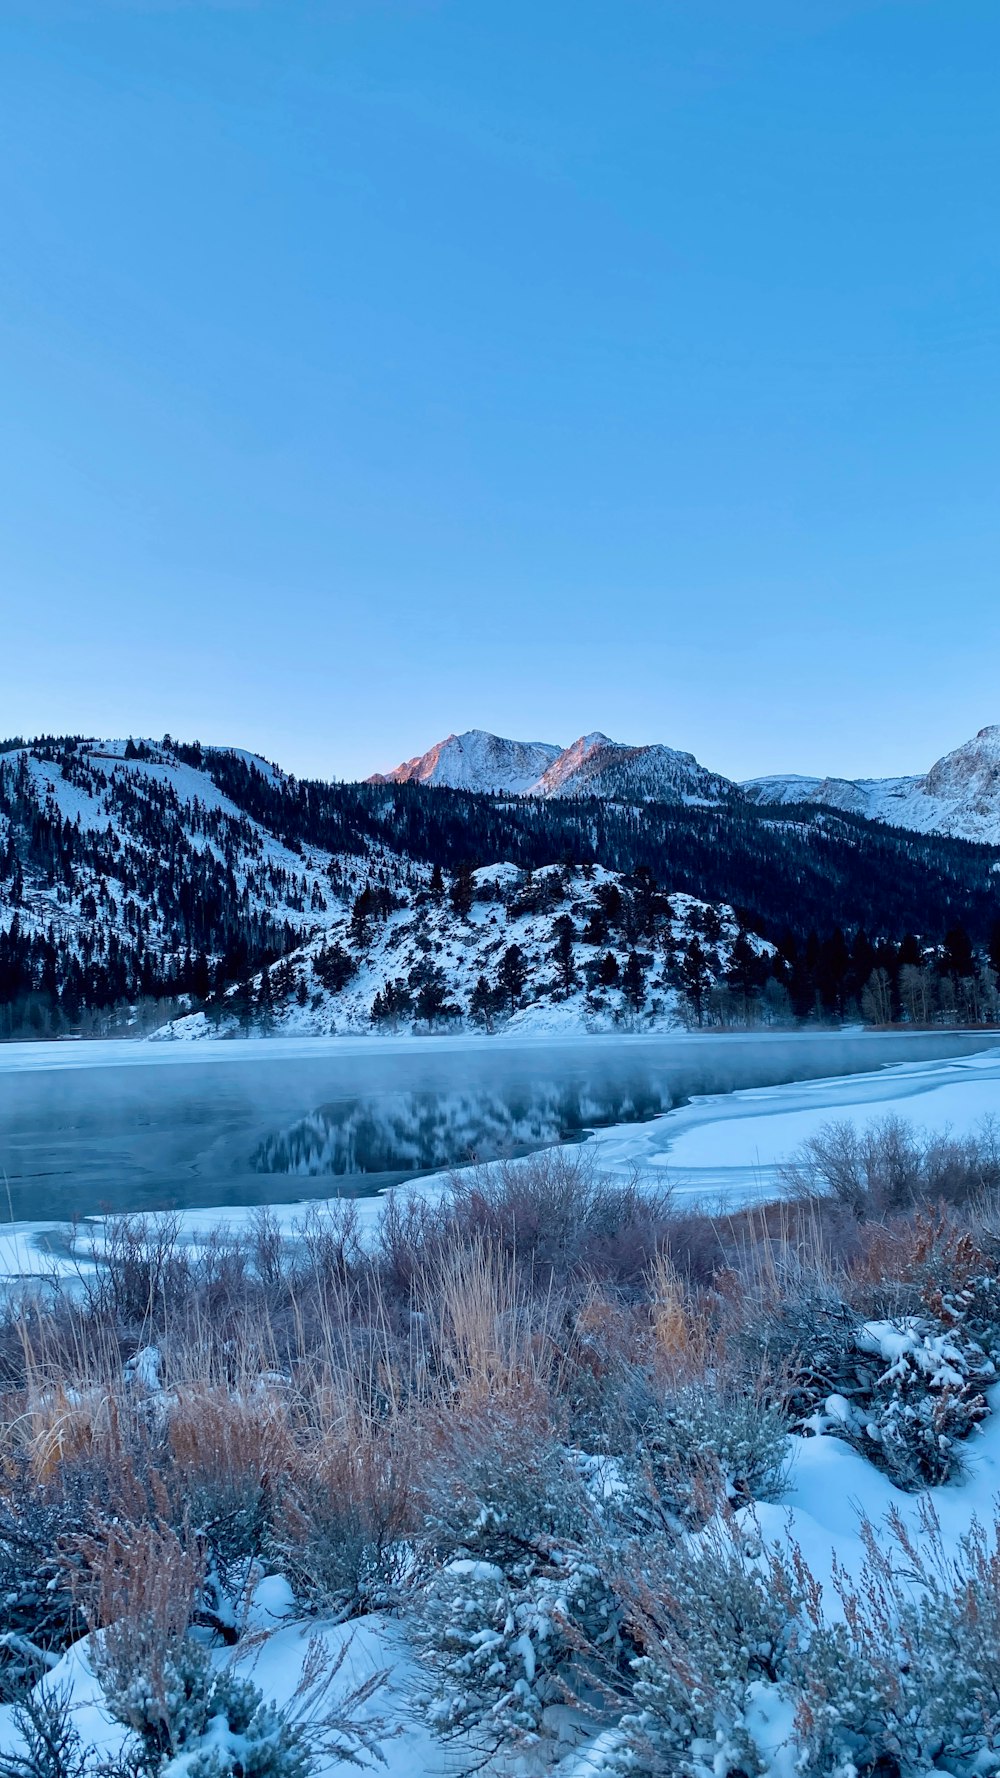 a scenic view of a mountain lake with snow on the ground